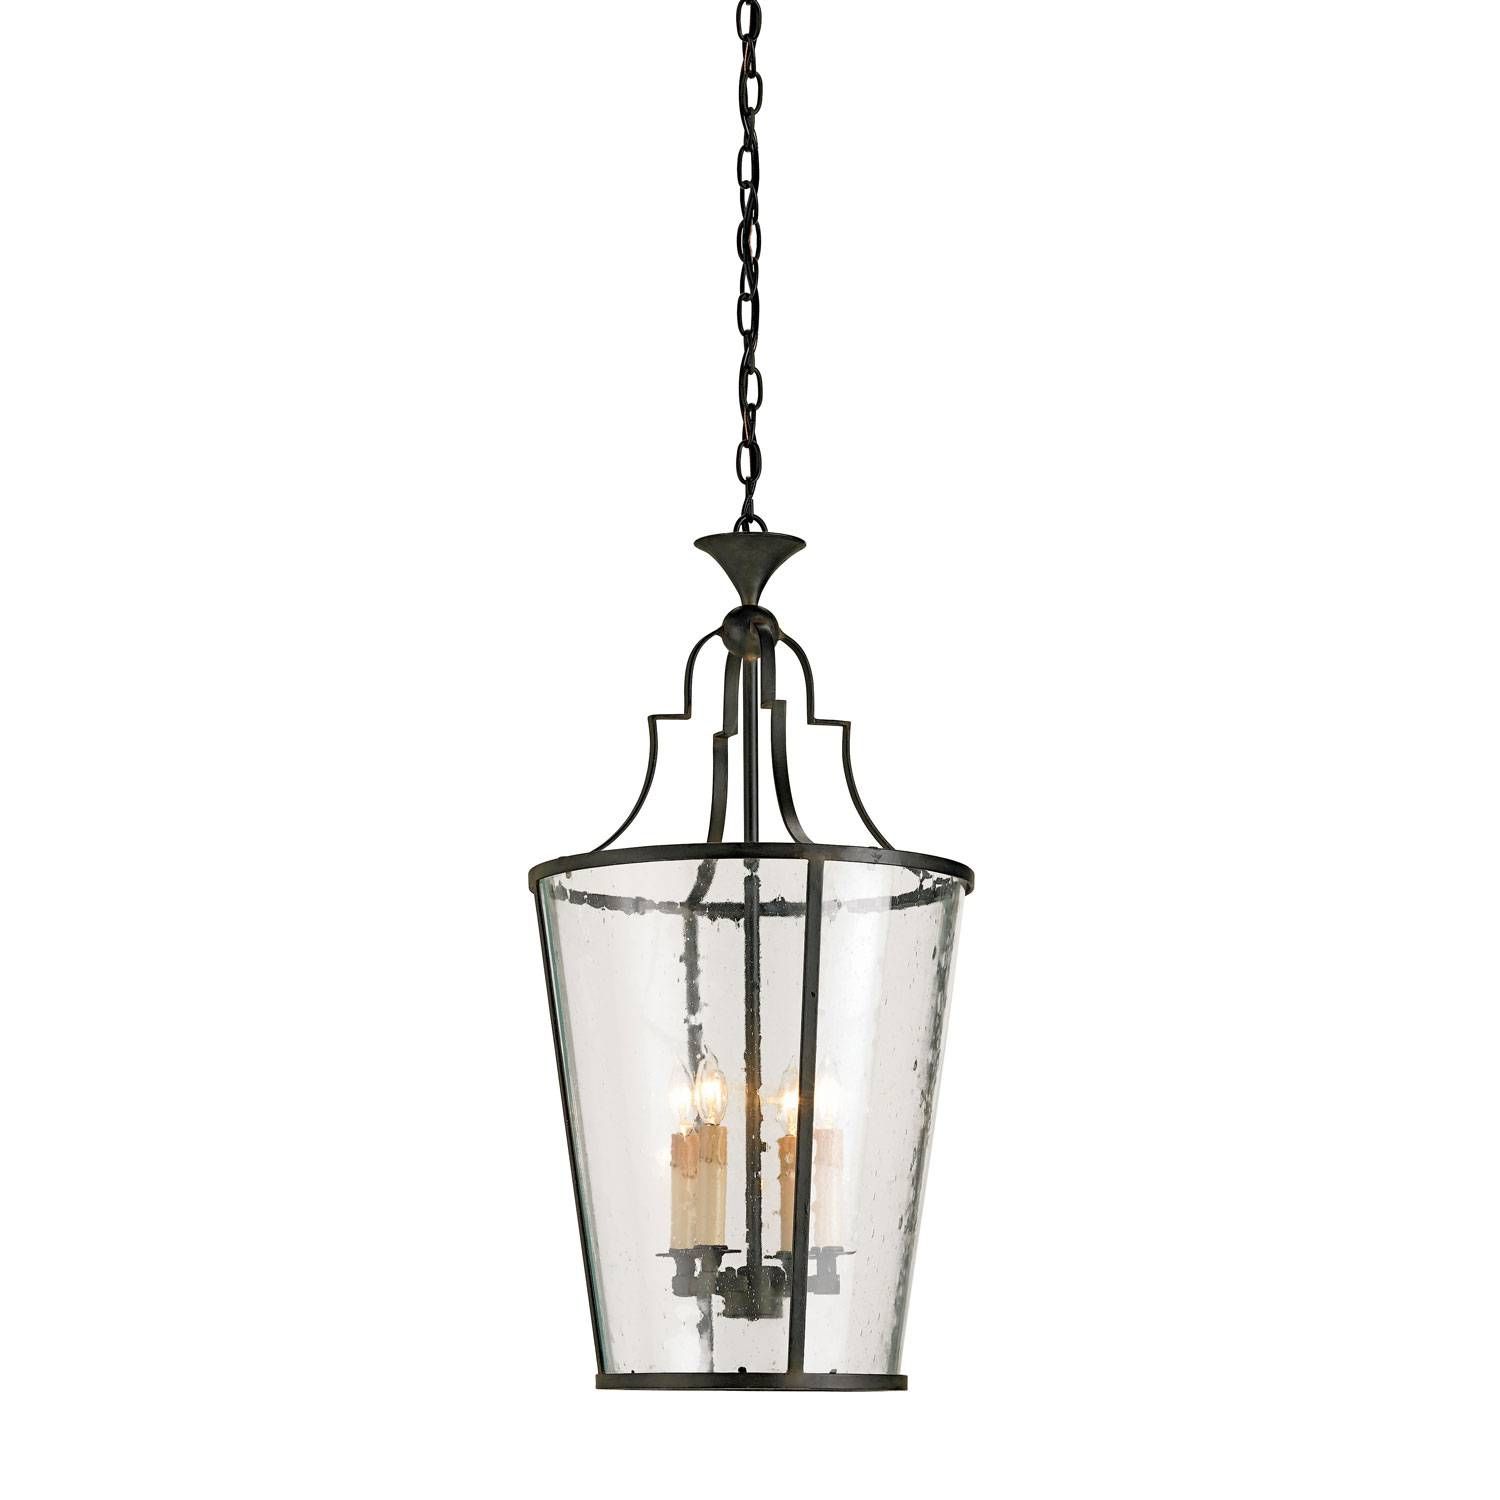 Victorian Pendant Lighting Antique Style Hanging Lights | Bellacor Intended For Victorian Pendant Lighting (Photo 2 of 15)